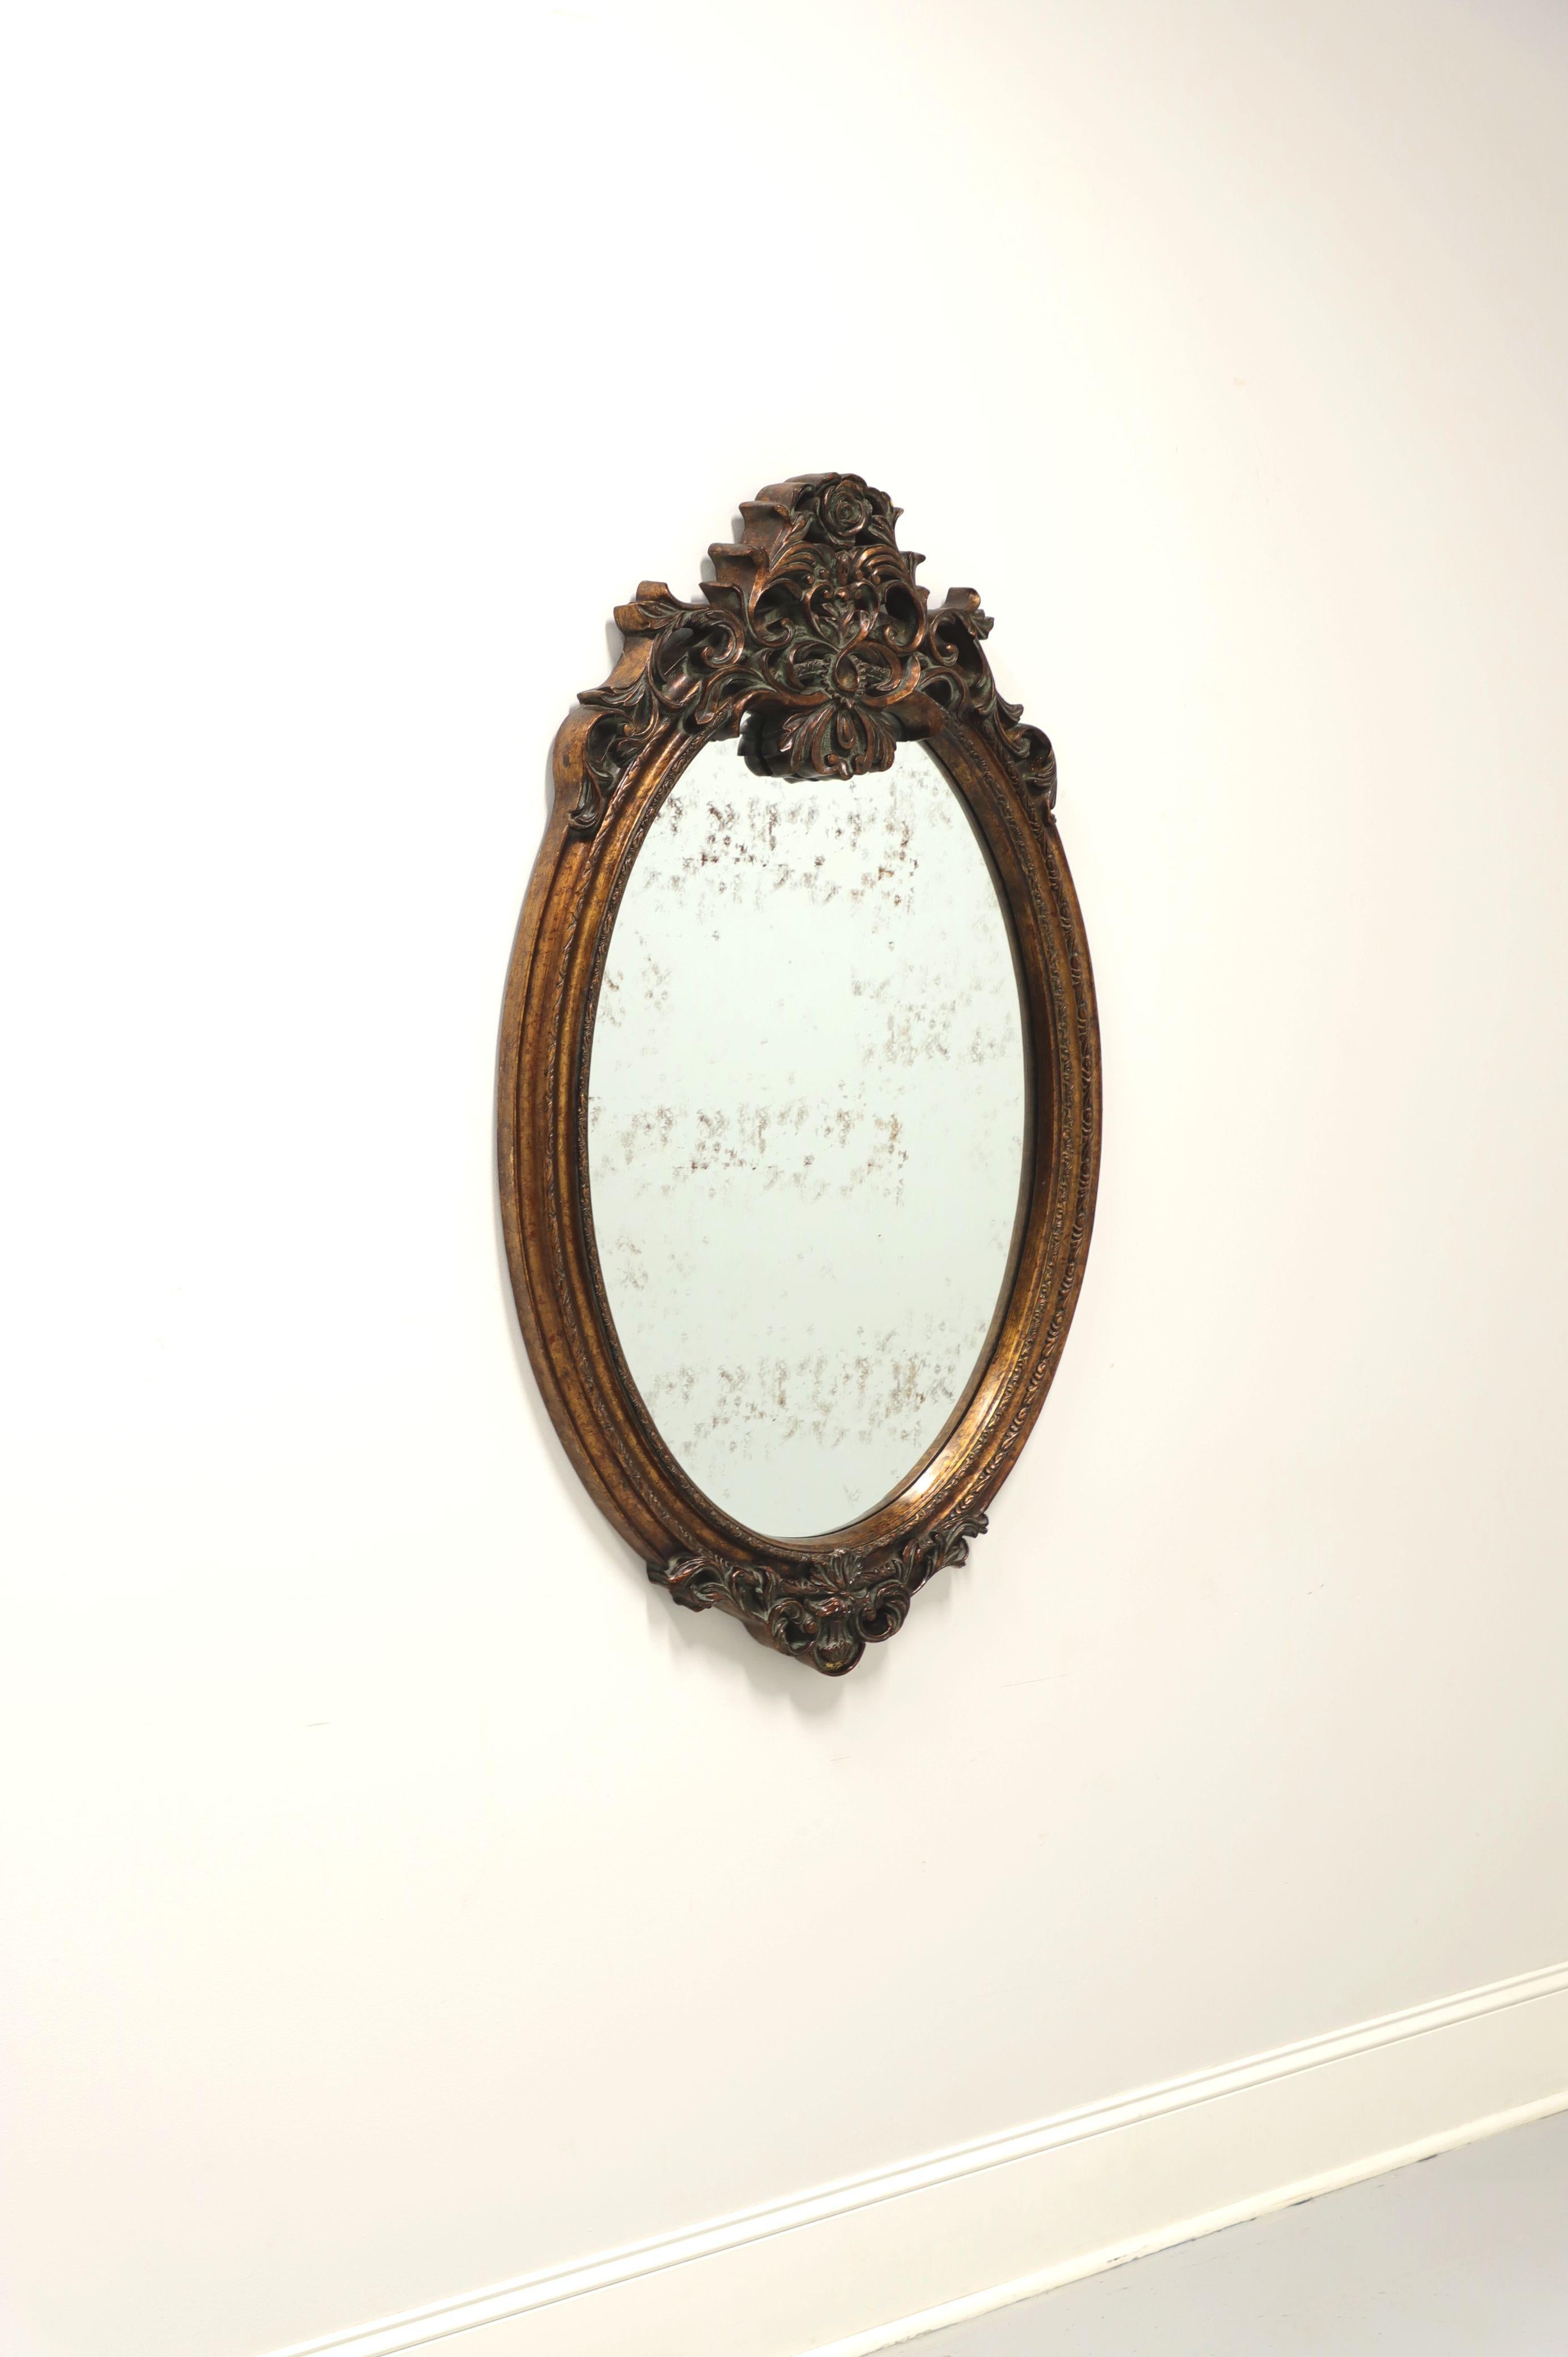 A Baroque style oval wall mirror, unbranded. Mirrored glass intentionally silvered to make appear aged with a sculpted foam frame painted bronze. Features ornate floral carving to top and bottom. Likely made in the USA, in the early 21st